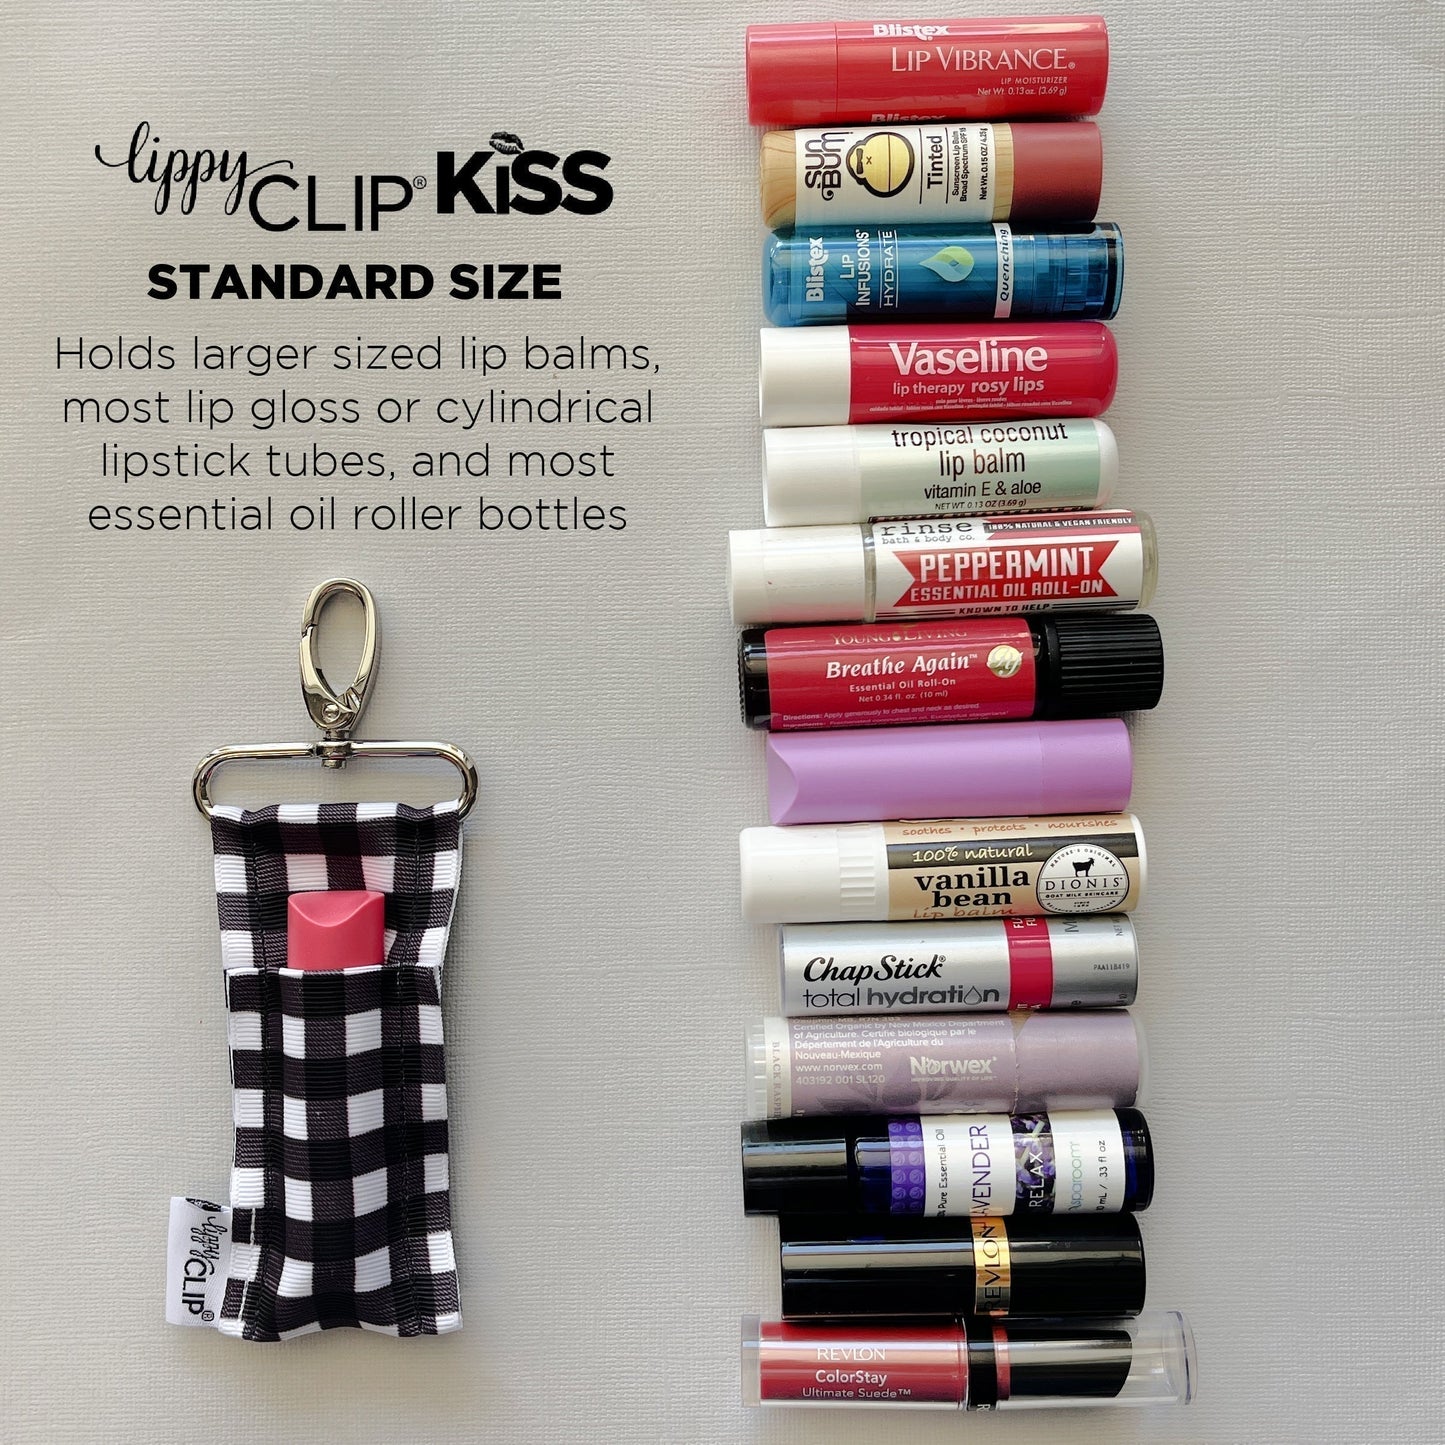 Cow Print LippyClipKISS for larger lip balms, essential oil rollers, and more